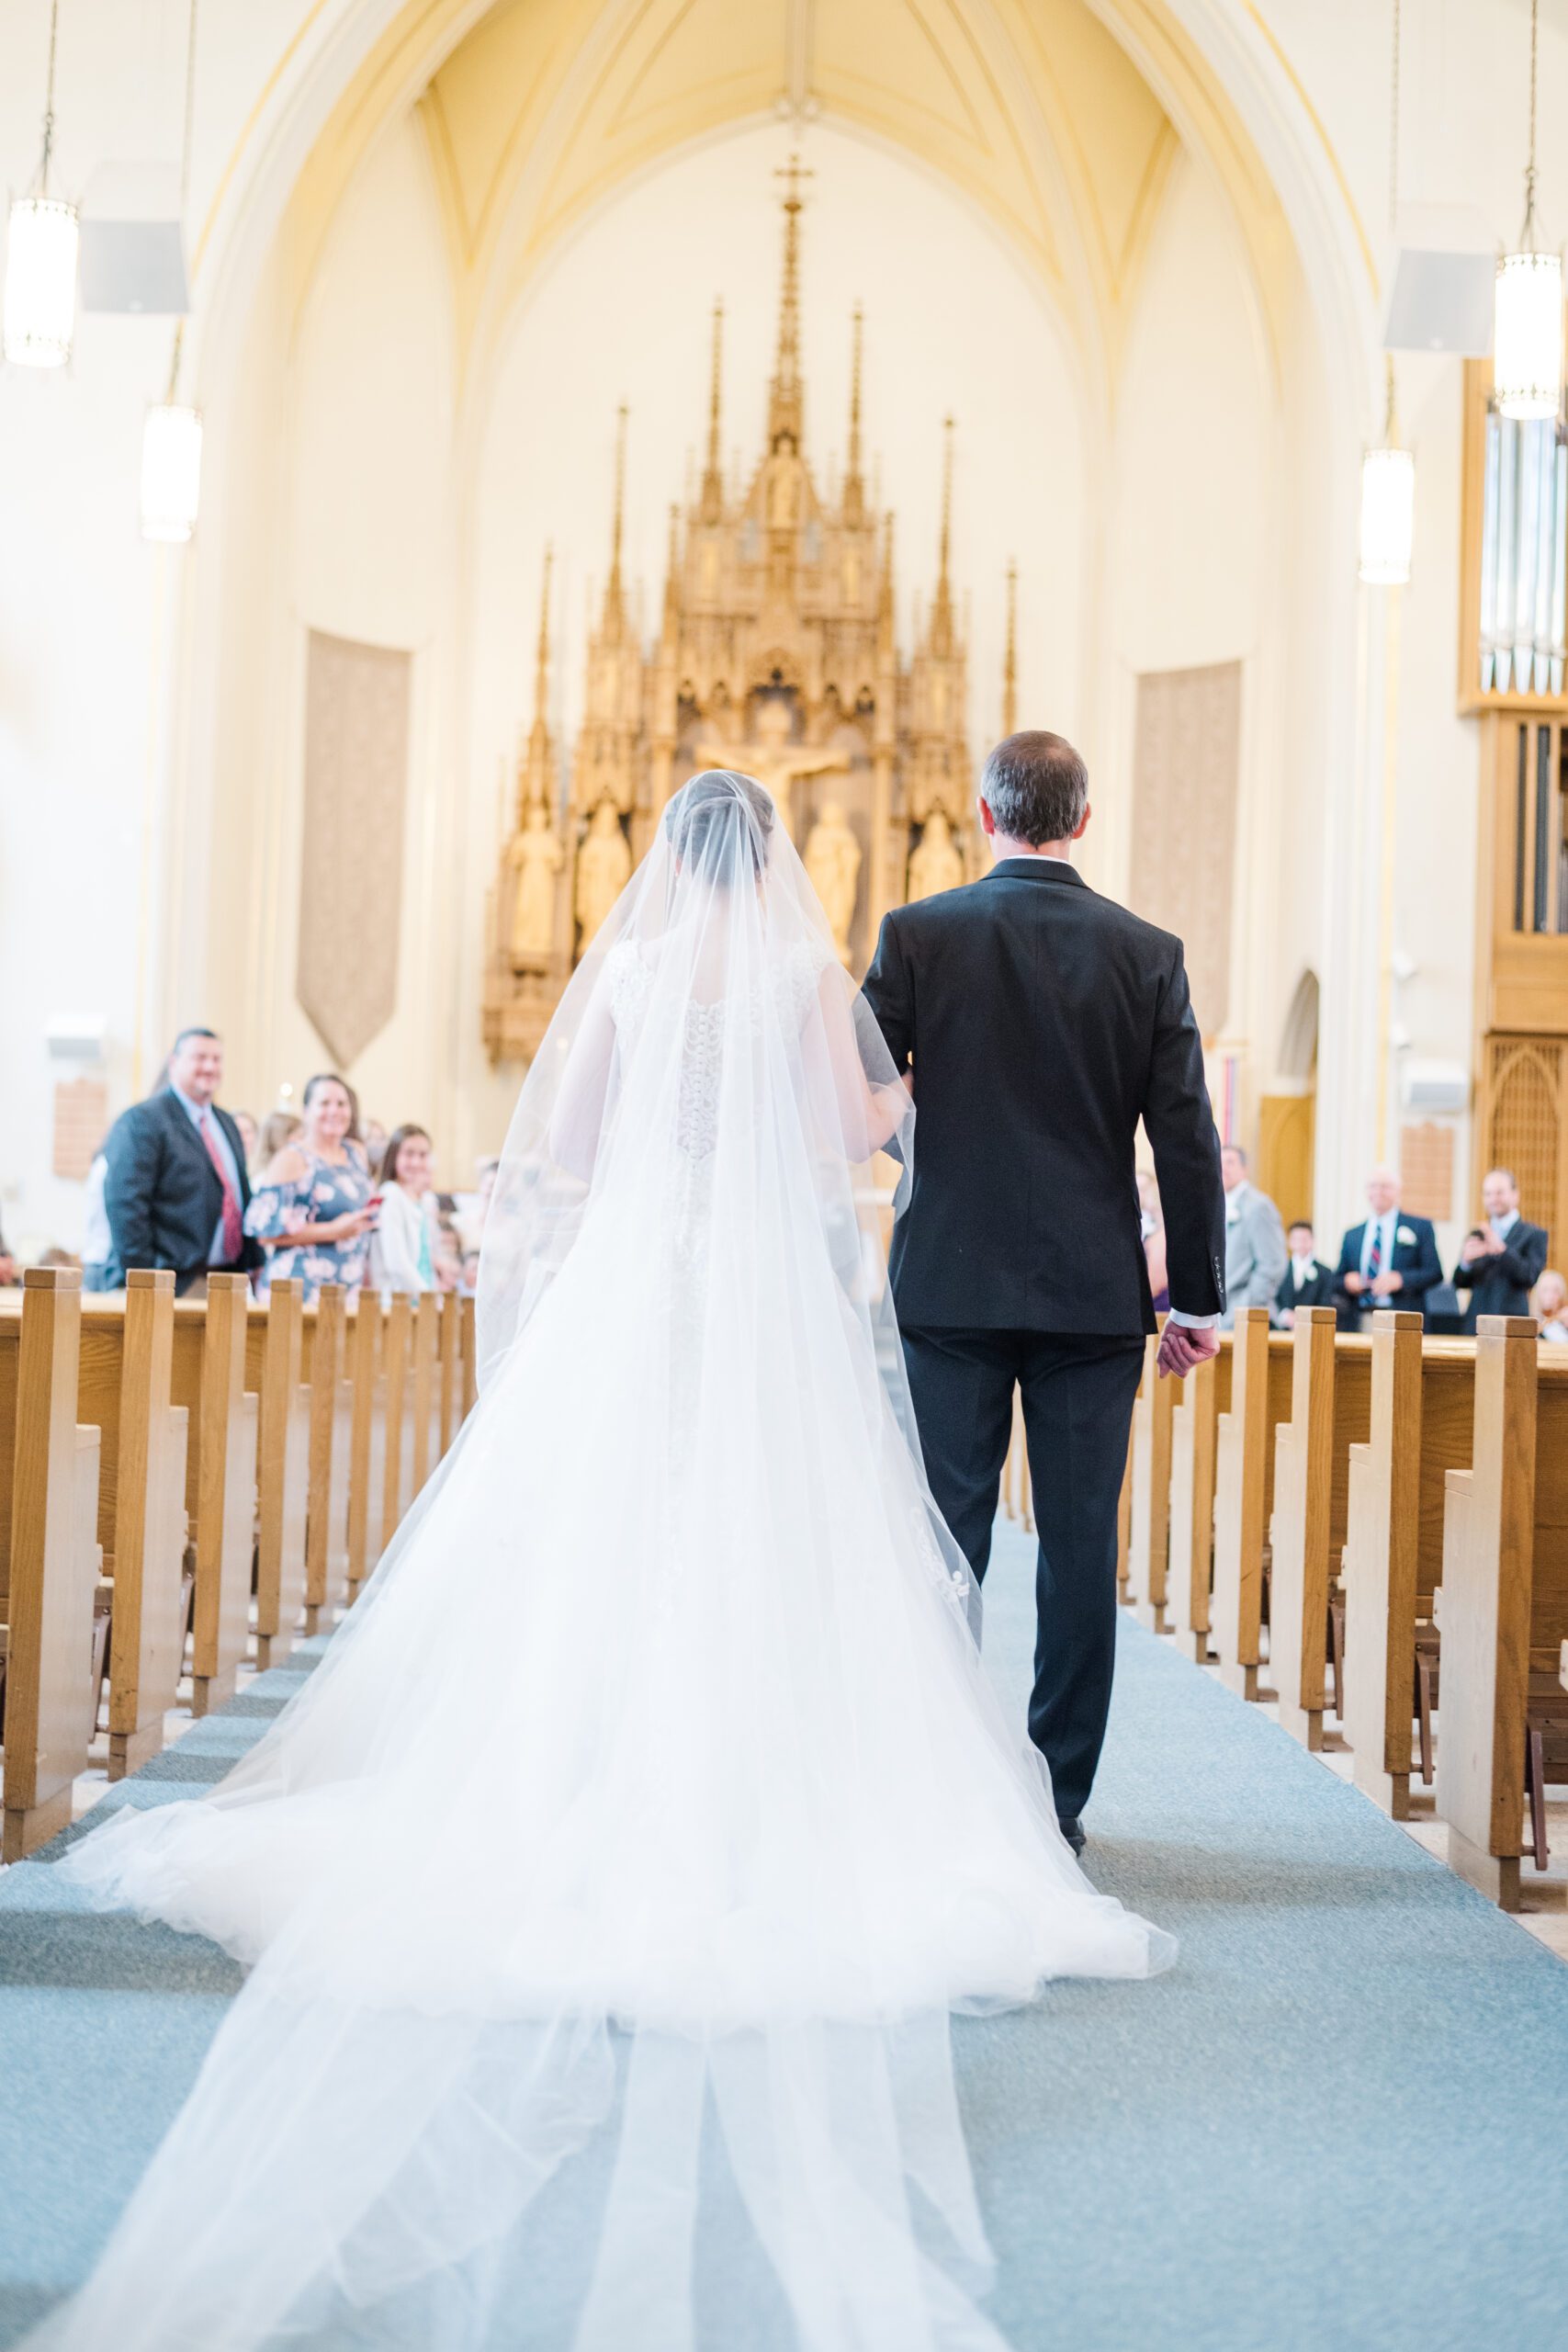 Bride is escorted down the aisle at church by her Father during a Catholic wedding ceremony.